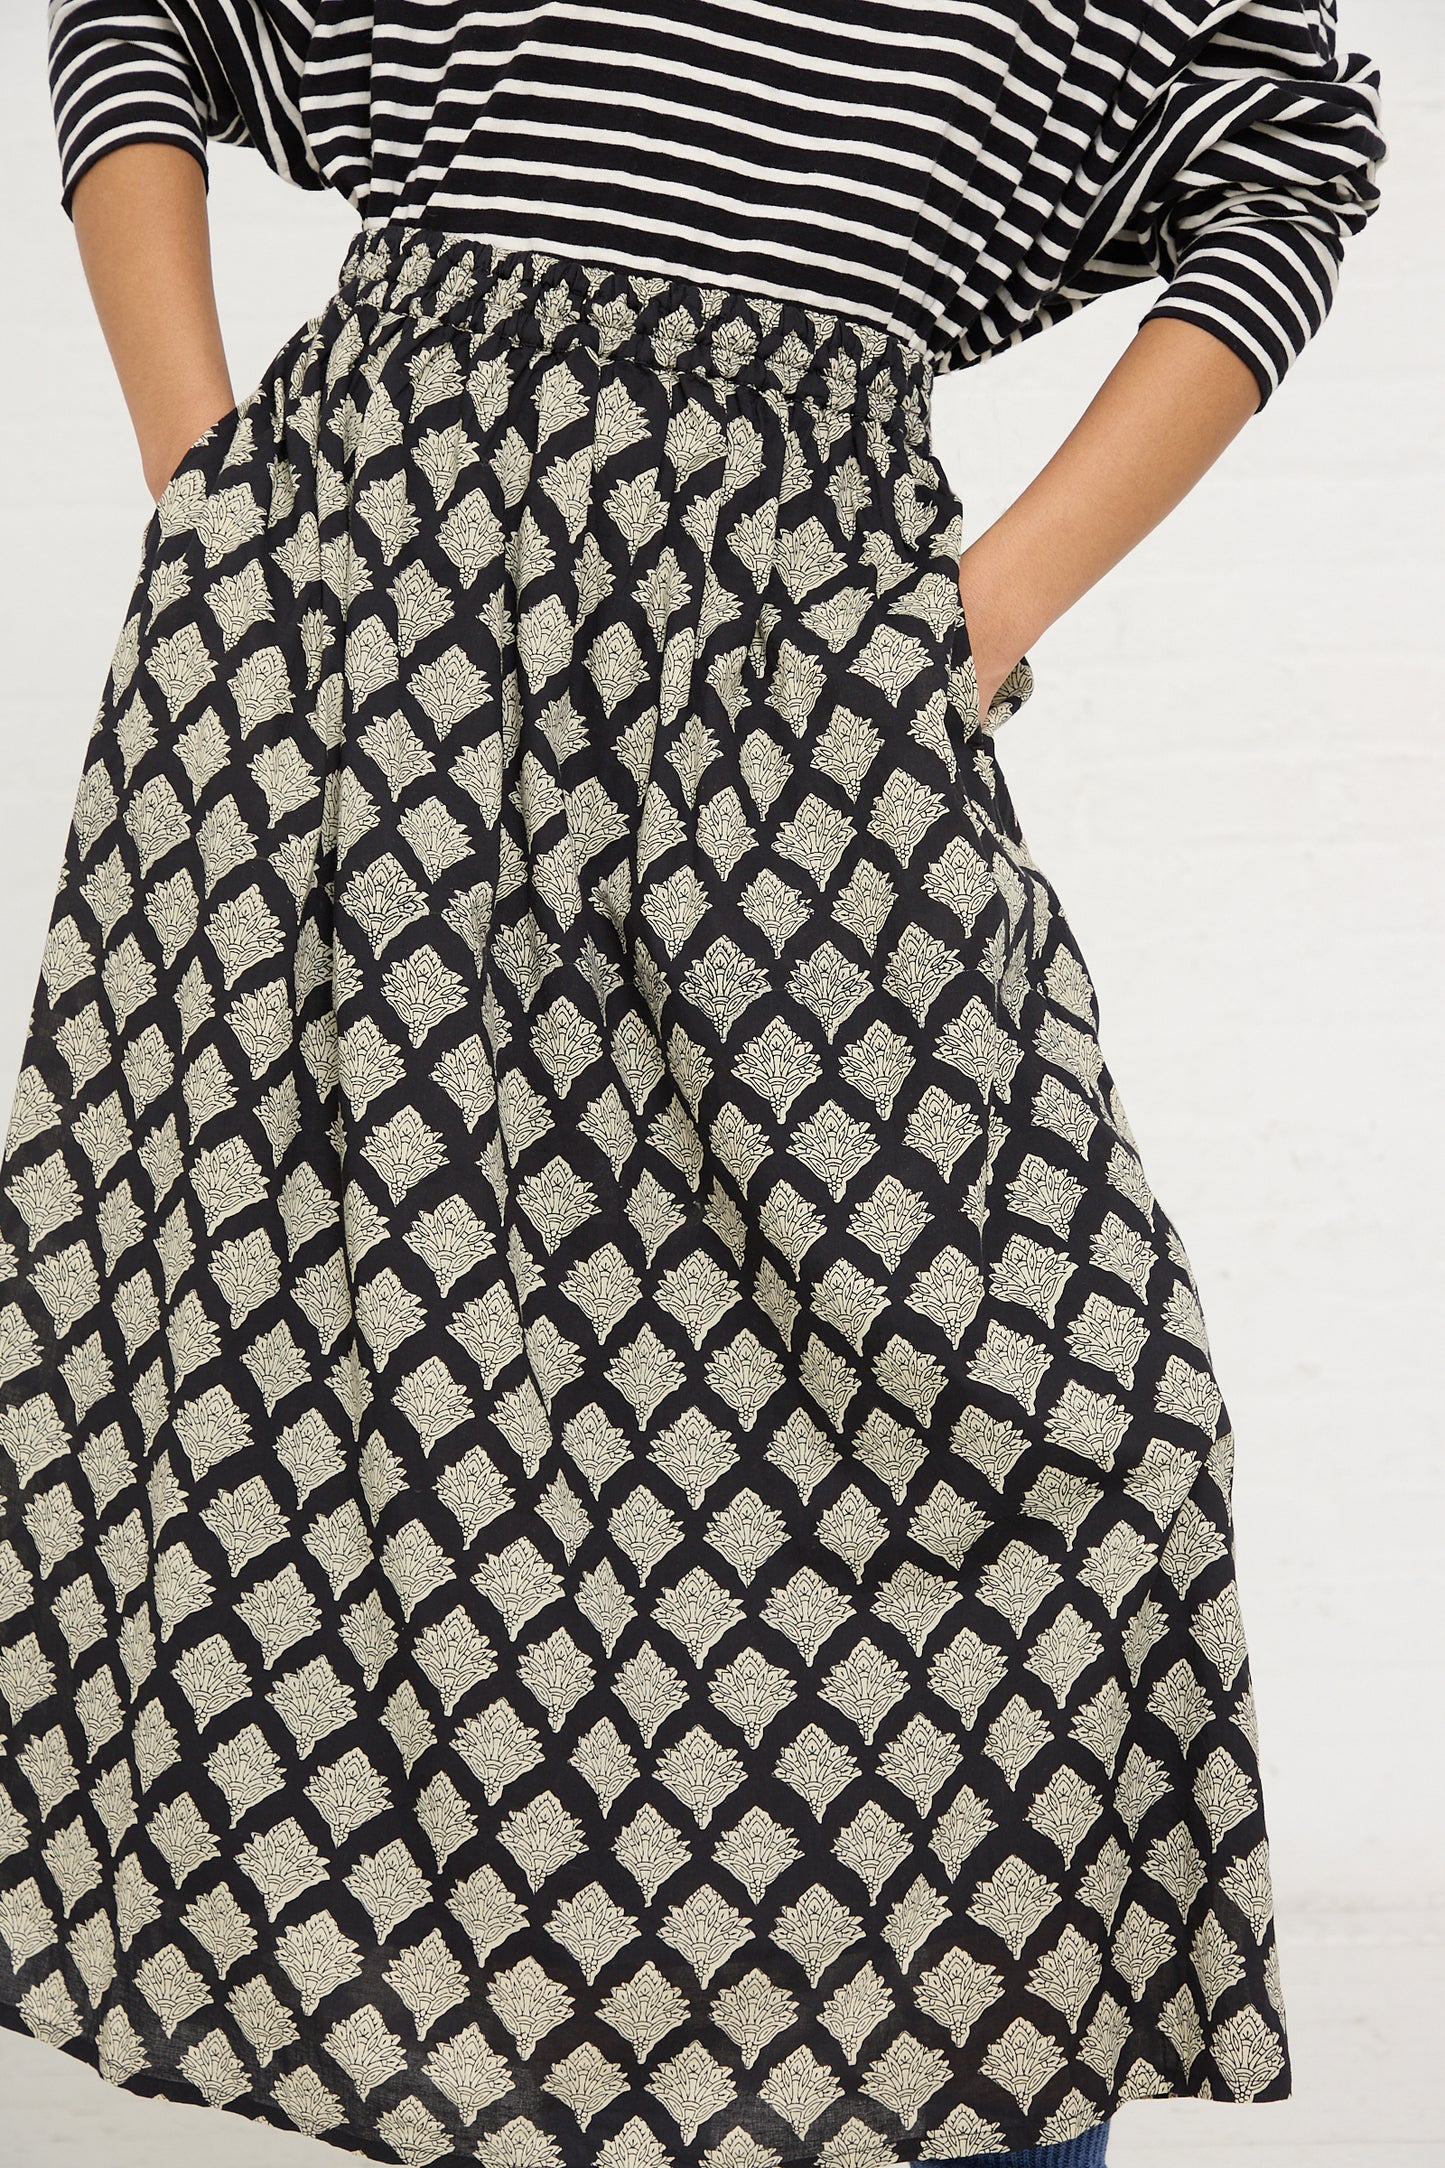 A person wearing a black and white Ichi Antiquités woven cotton Indian block print midi skirt with pockets, paired with a striped top.